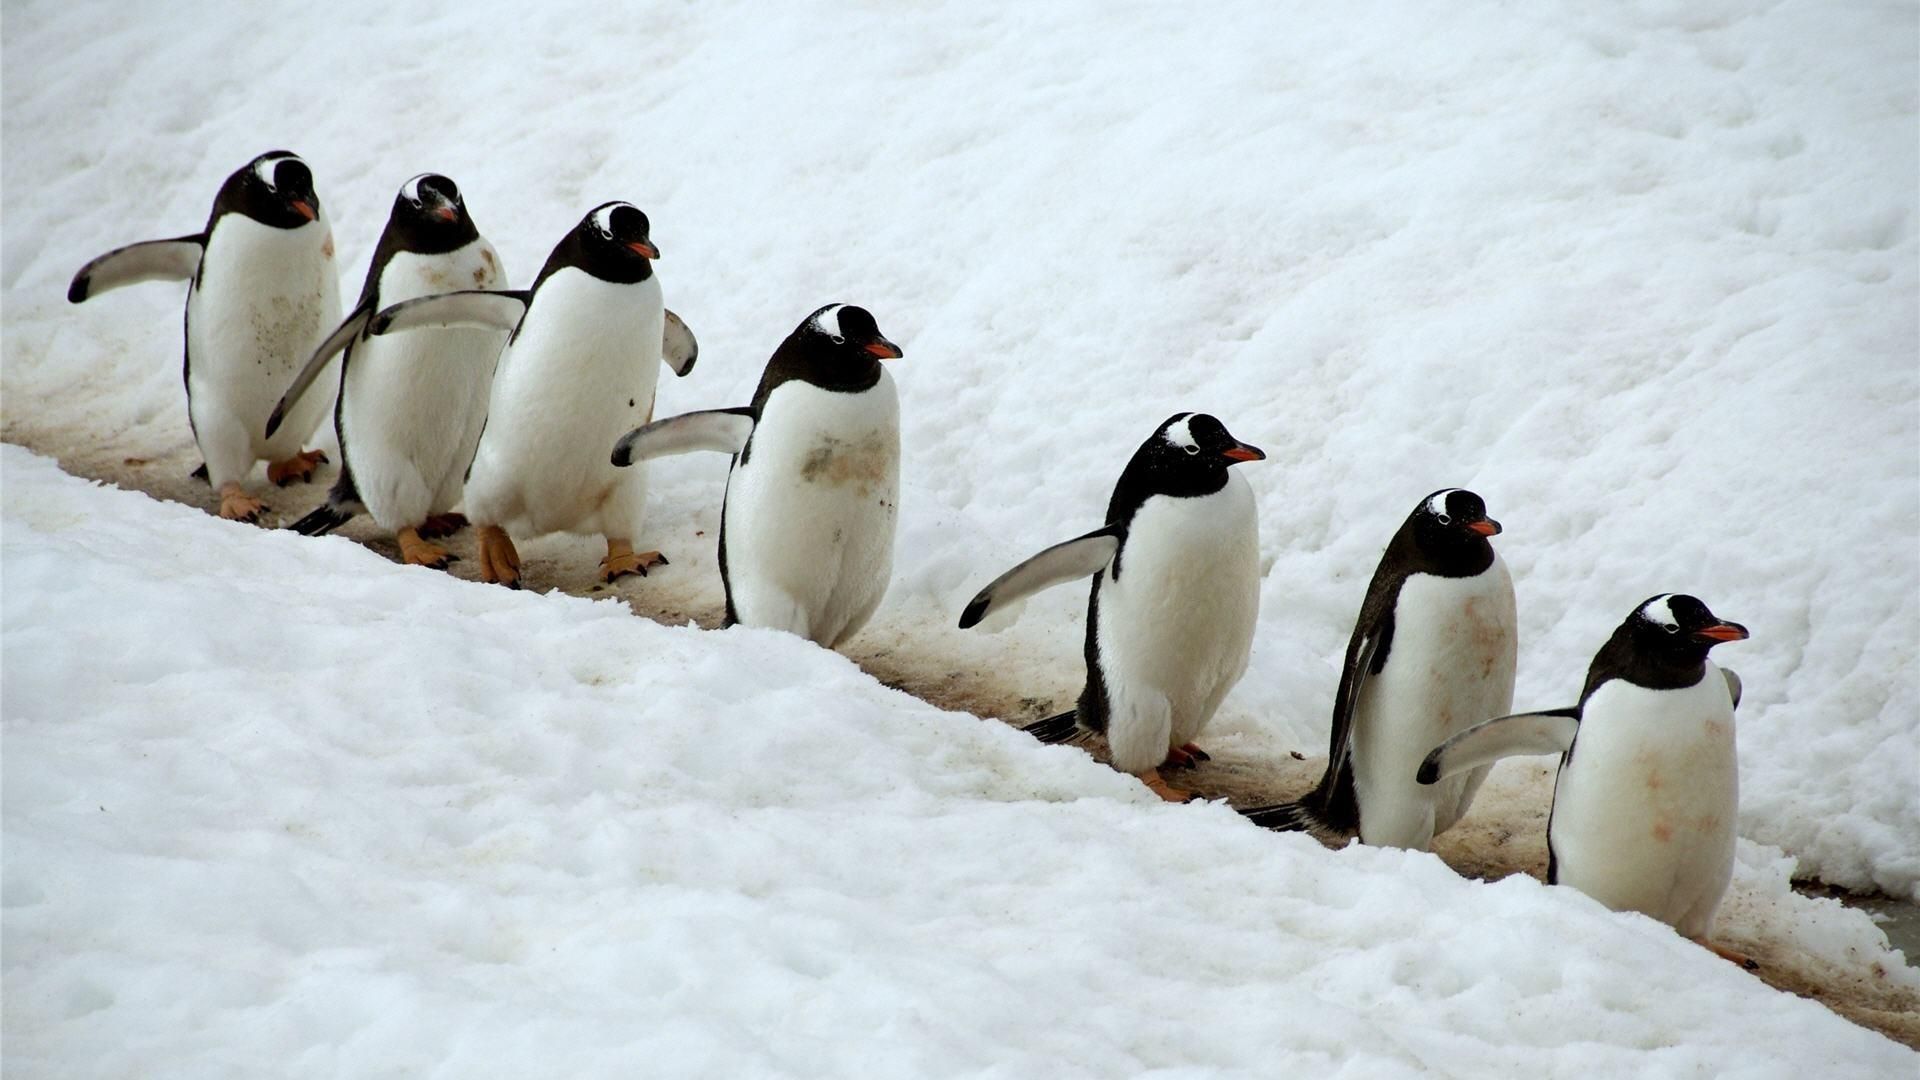 pitures of penguins